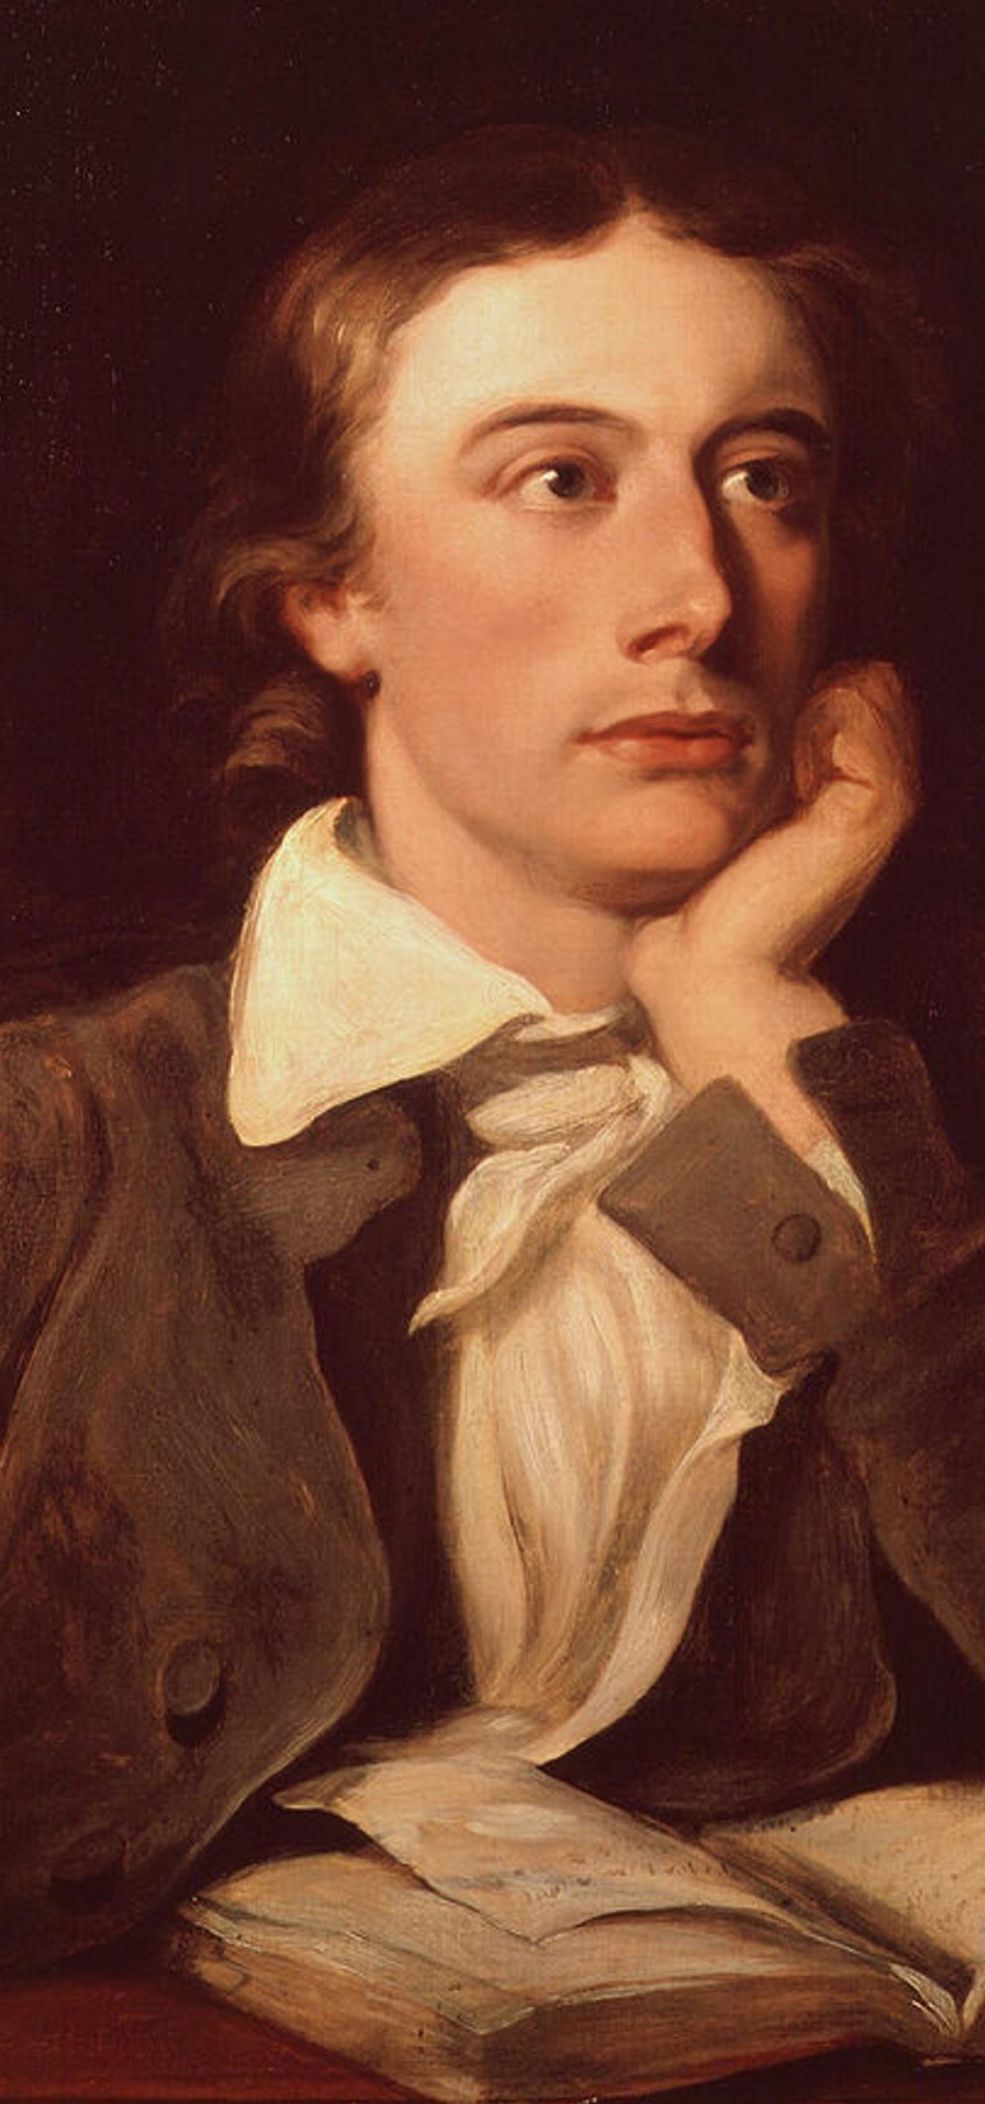 in what work did poet john keats first employ the term negative capability